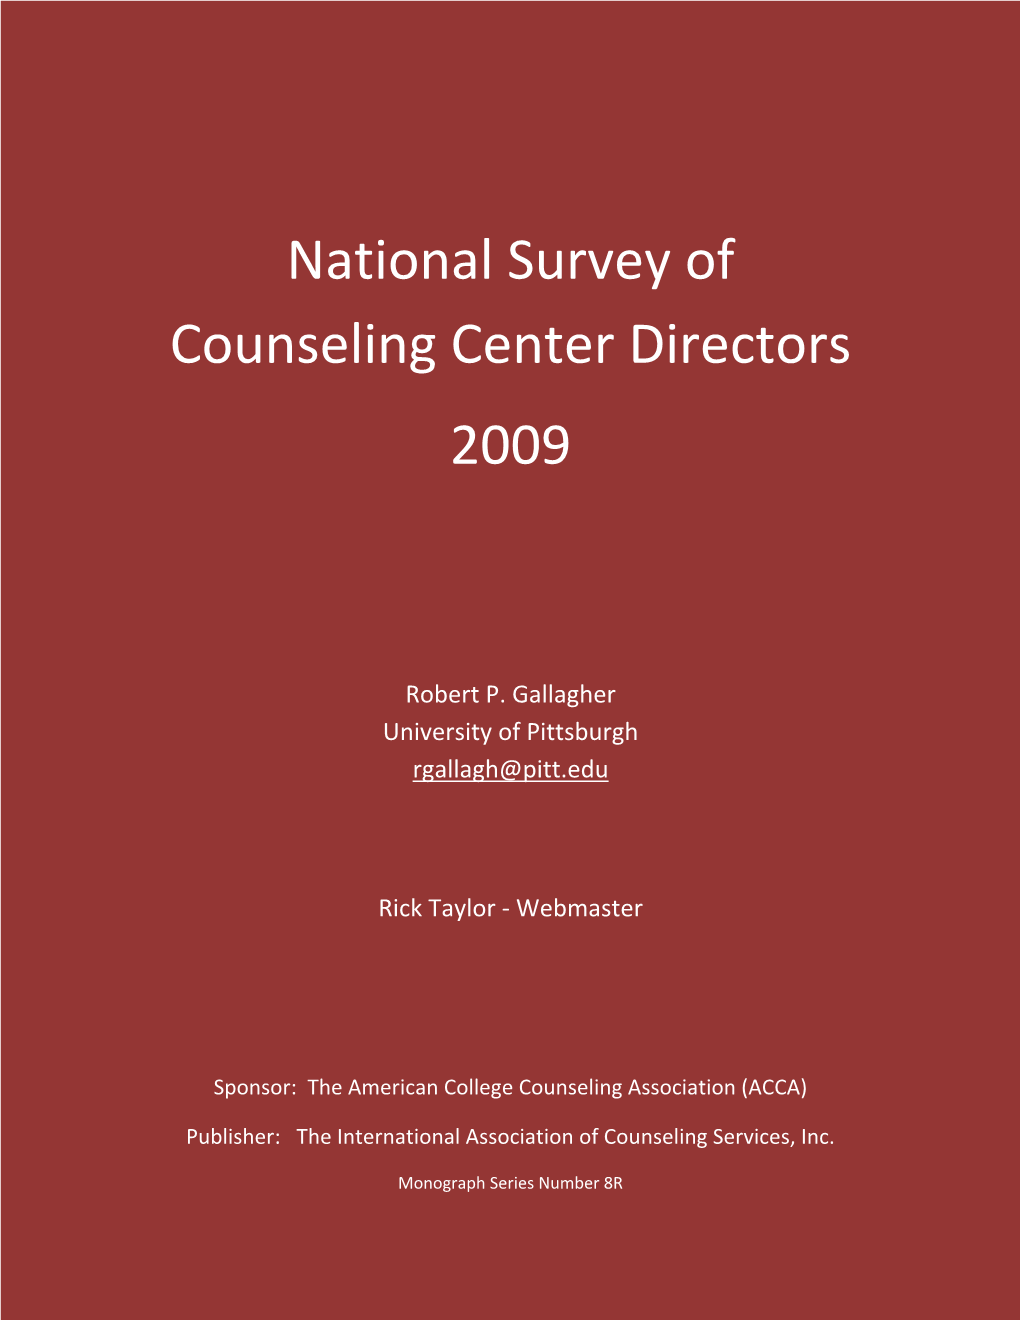 National Survey of Counseling Center Directors 2009